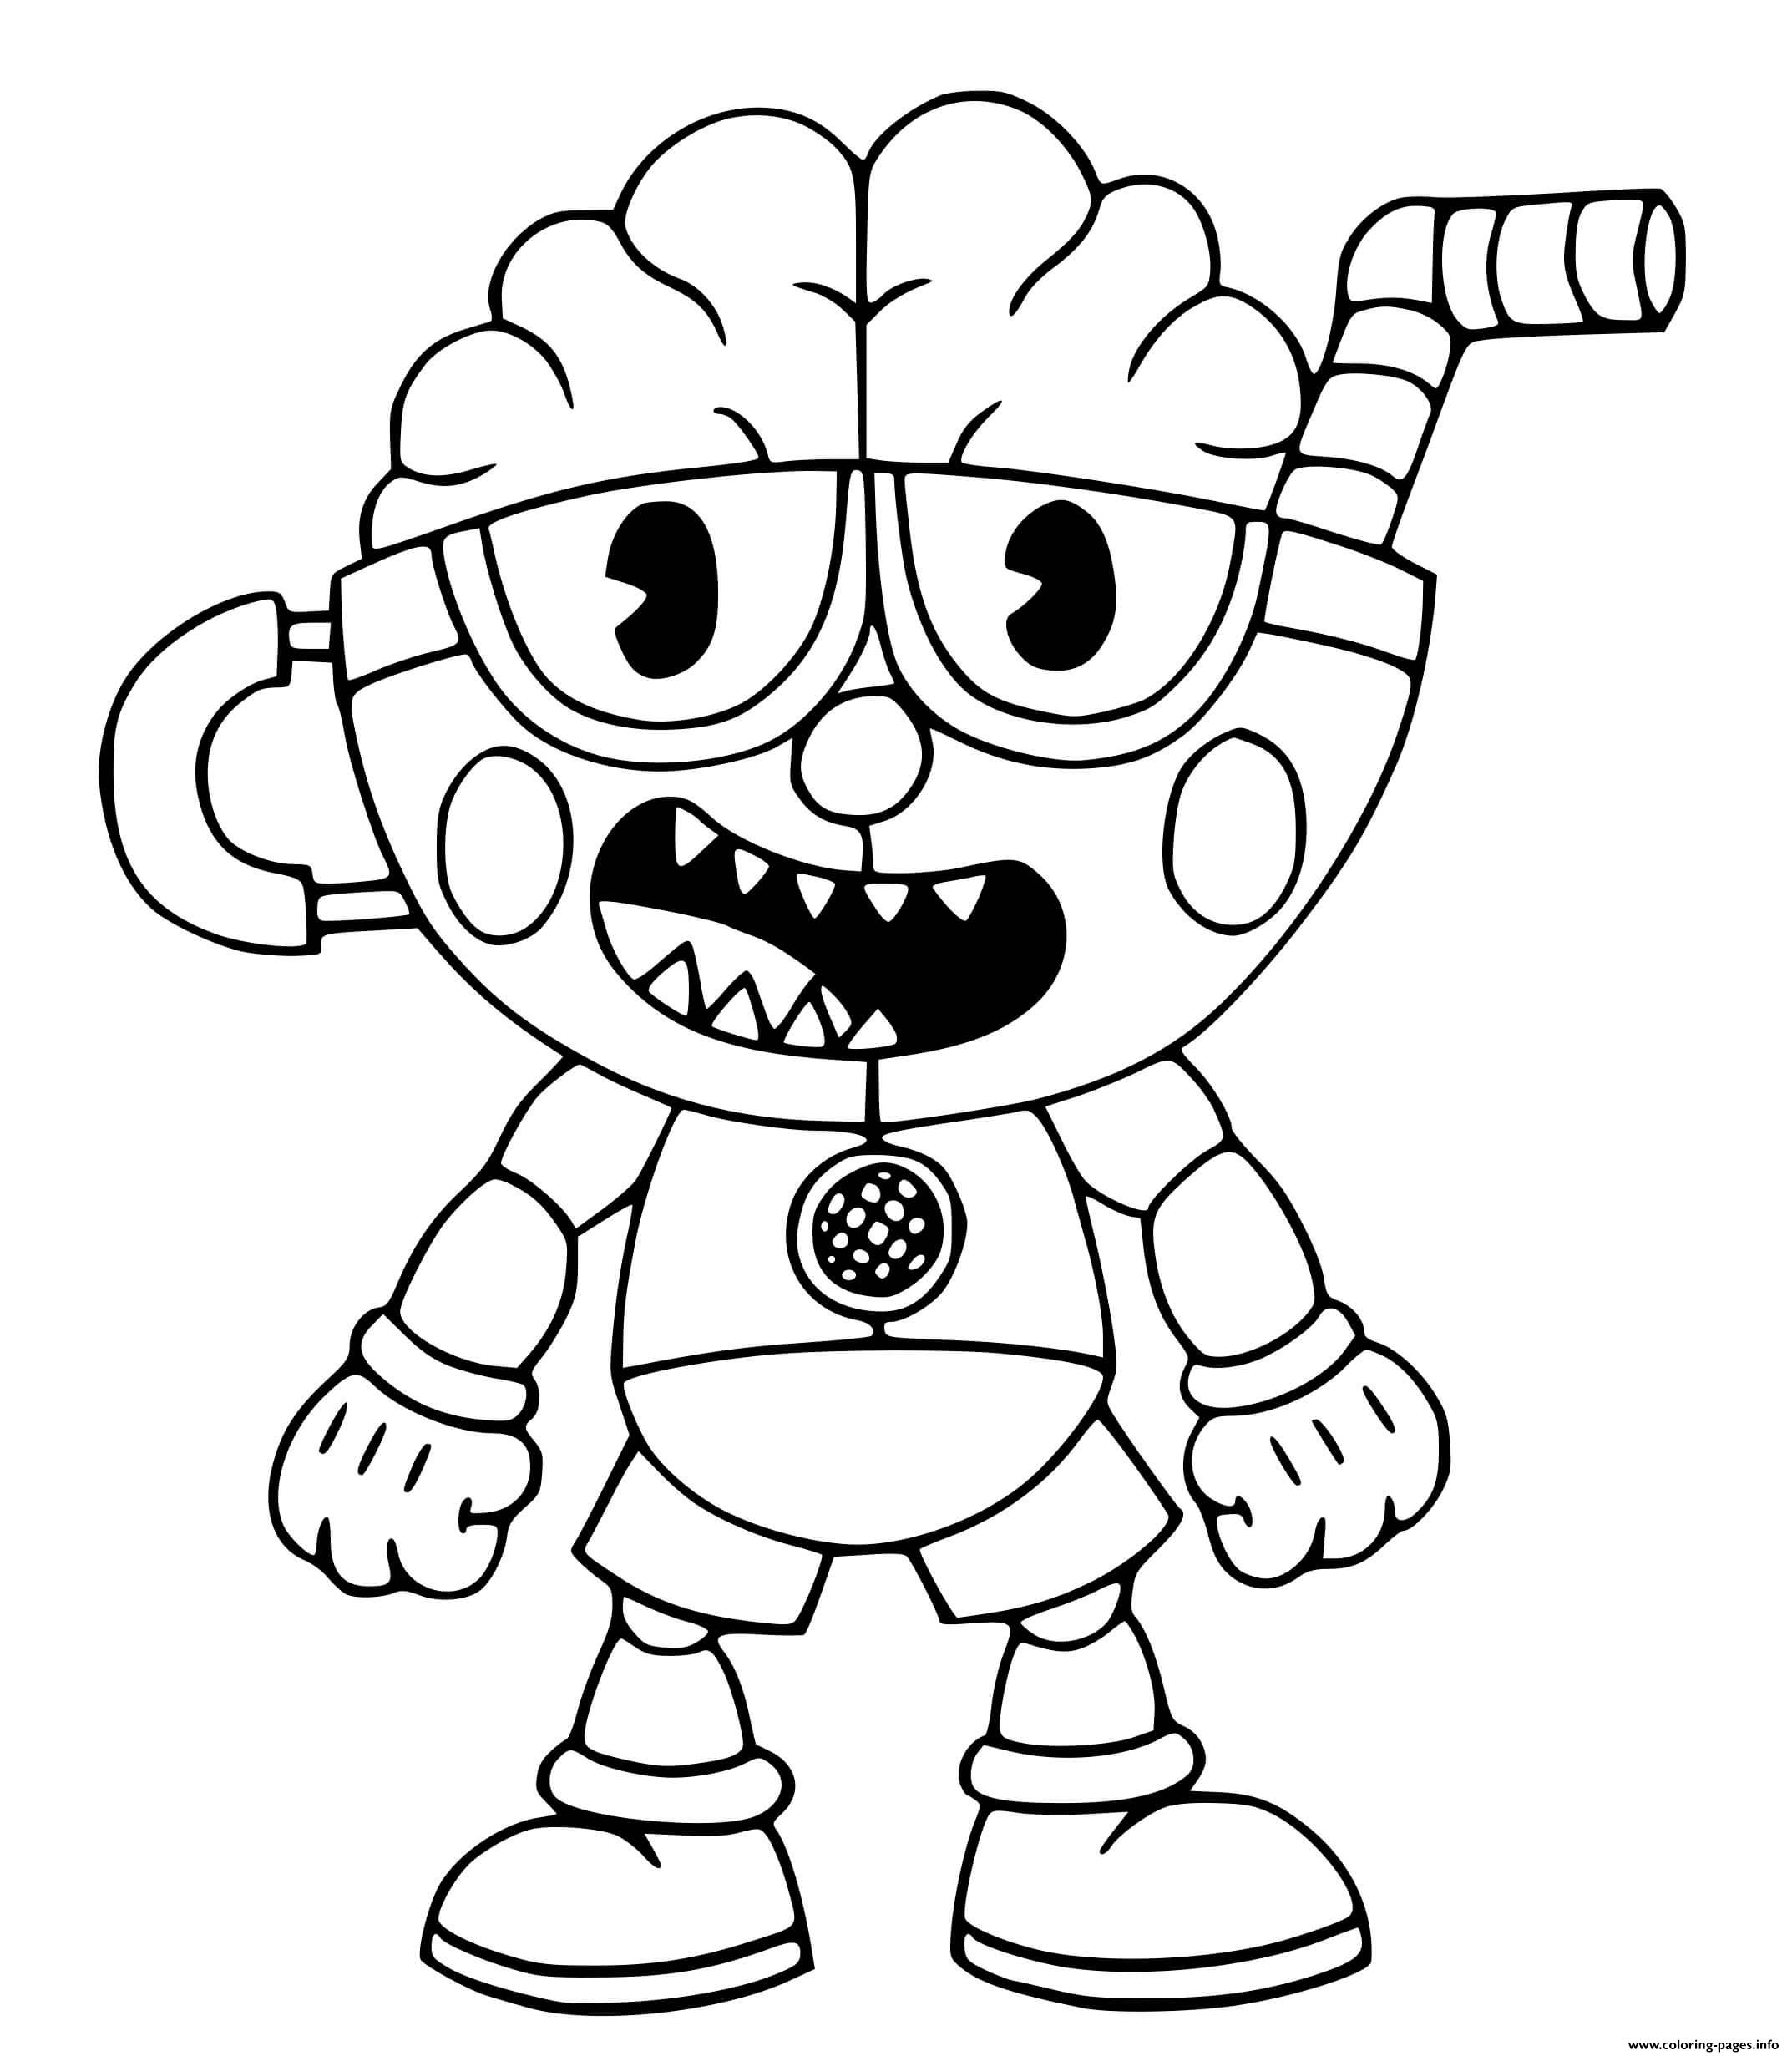 Cuphead coloring